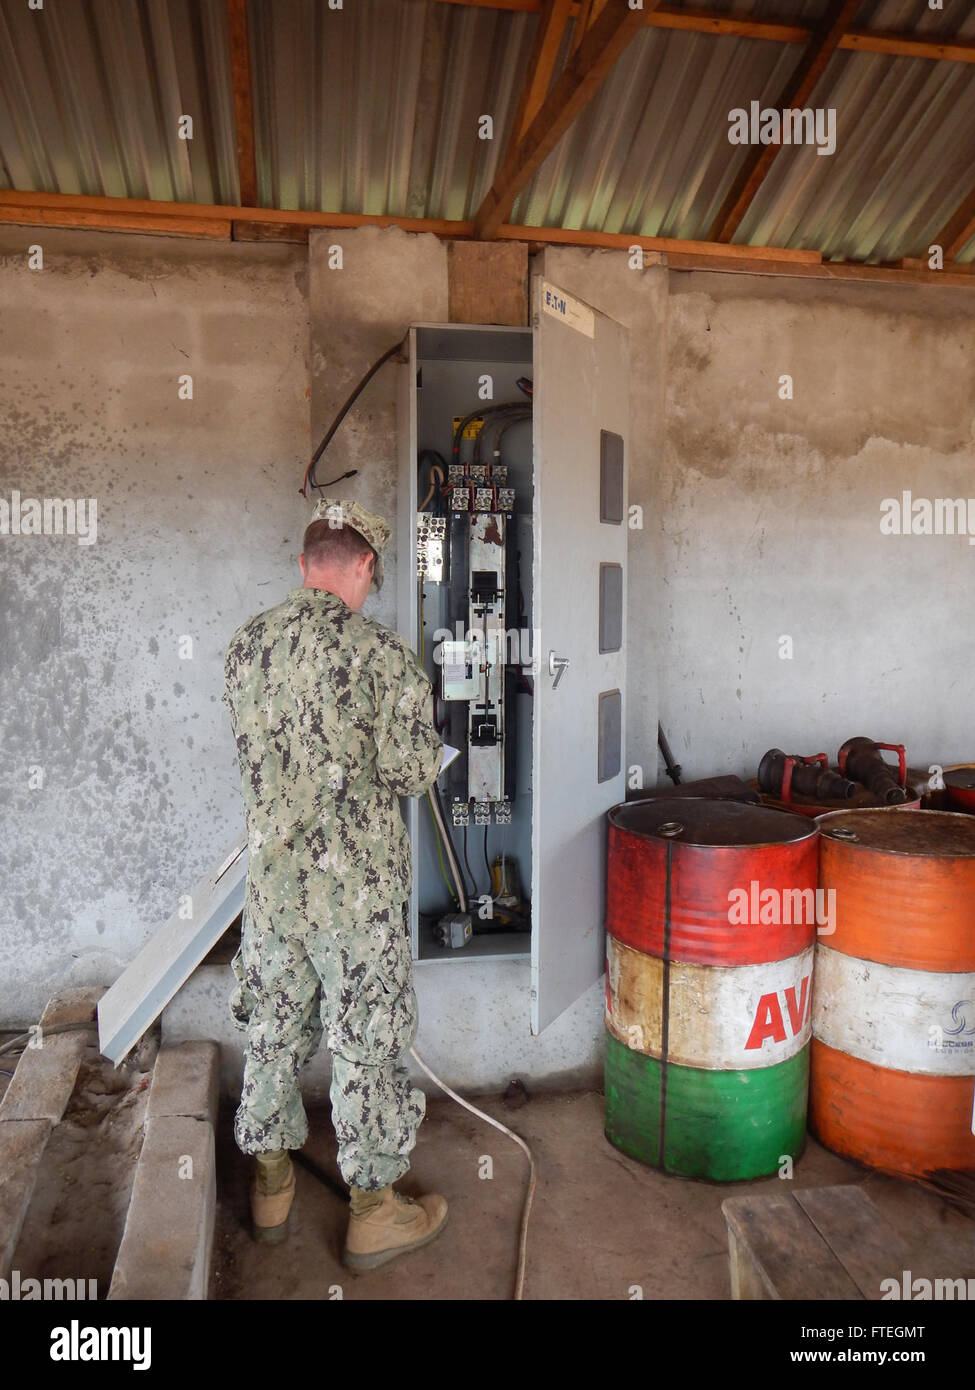 MONROVIA, Liberia (October 4, 2014)  Construction Electrician 2nd Class Matthew Mosley, assigned to Naval Mobile Construction Battalion 133, inspects a power panel to determine if it is repairable during a site assessment in Buchanan, Liberia; a possible site for future berthing of U.S. Forces in support of Operation United Assistance. Stock Photo